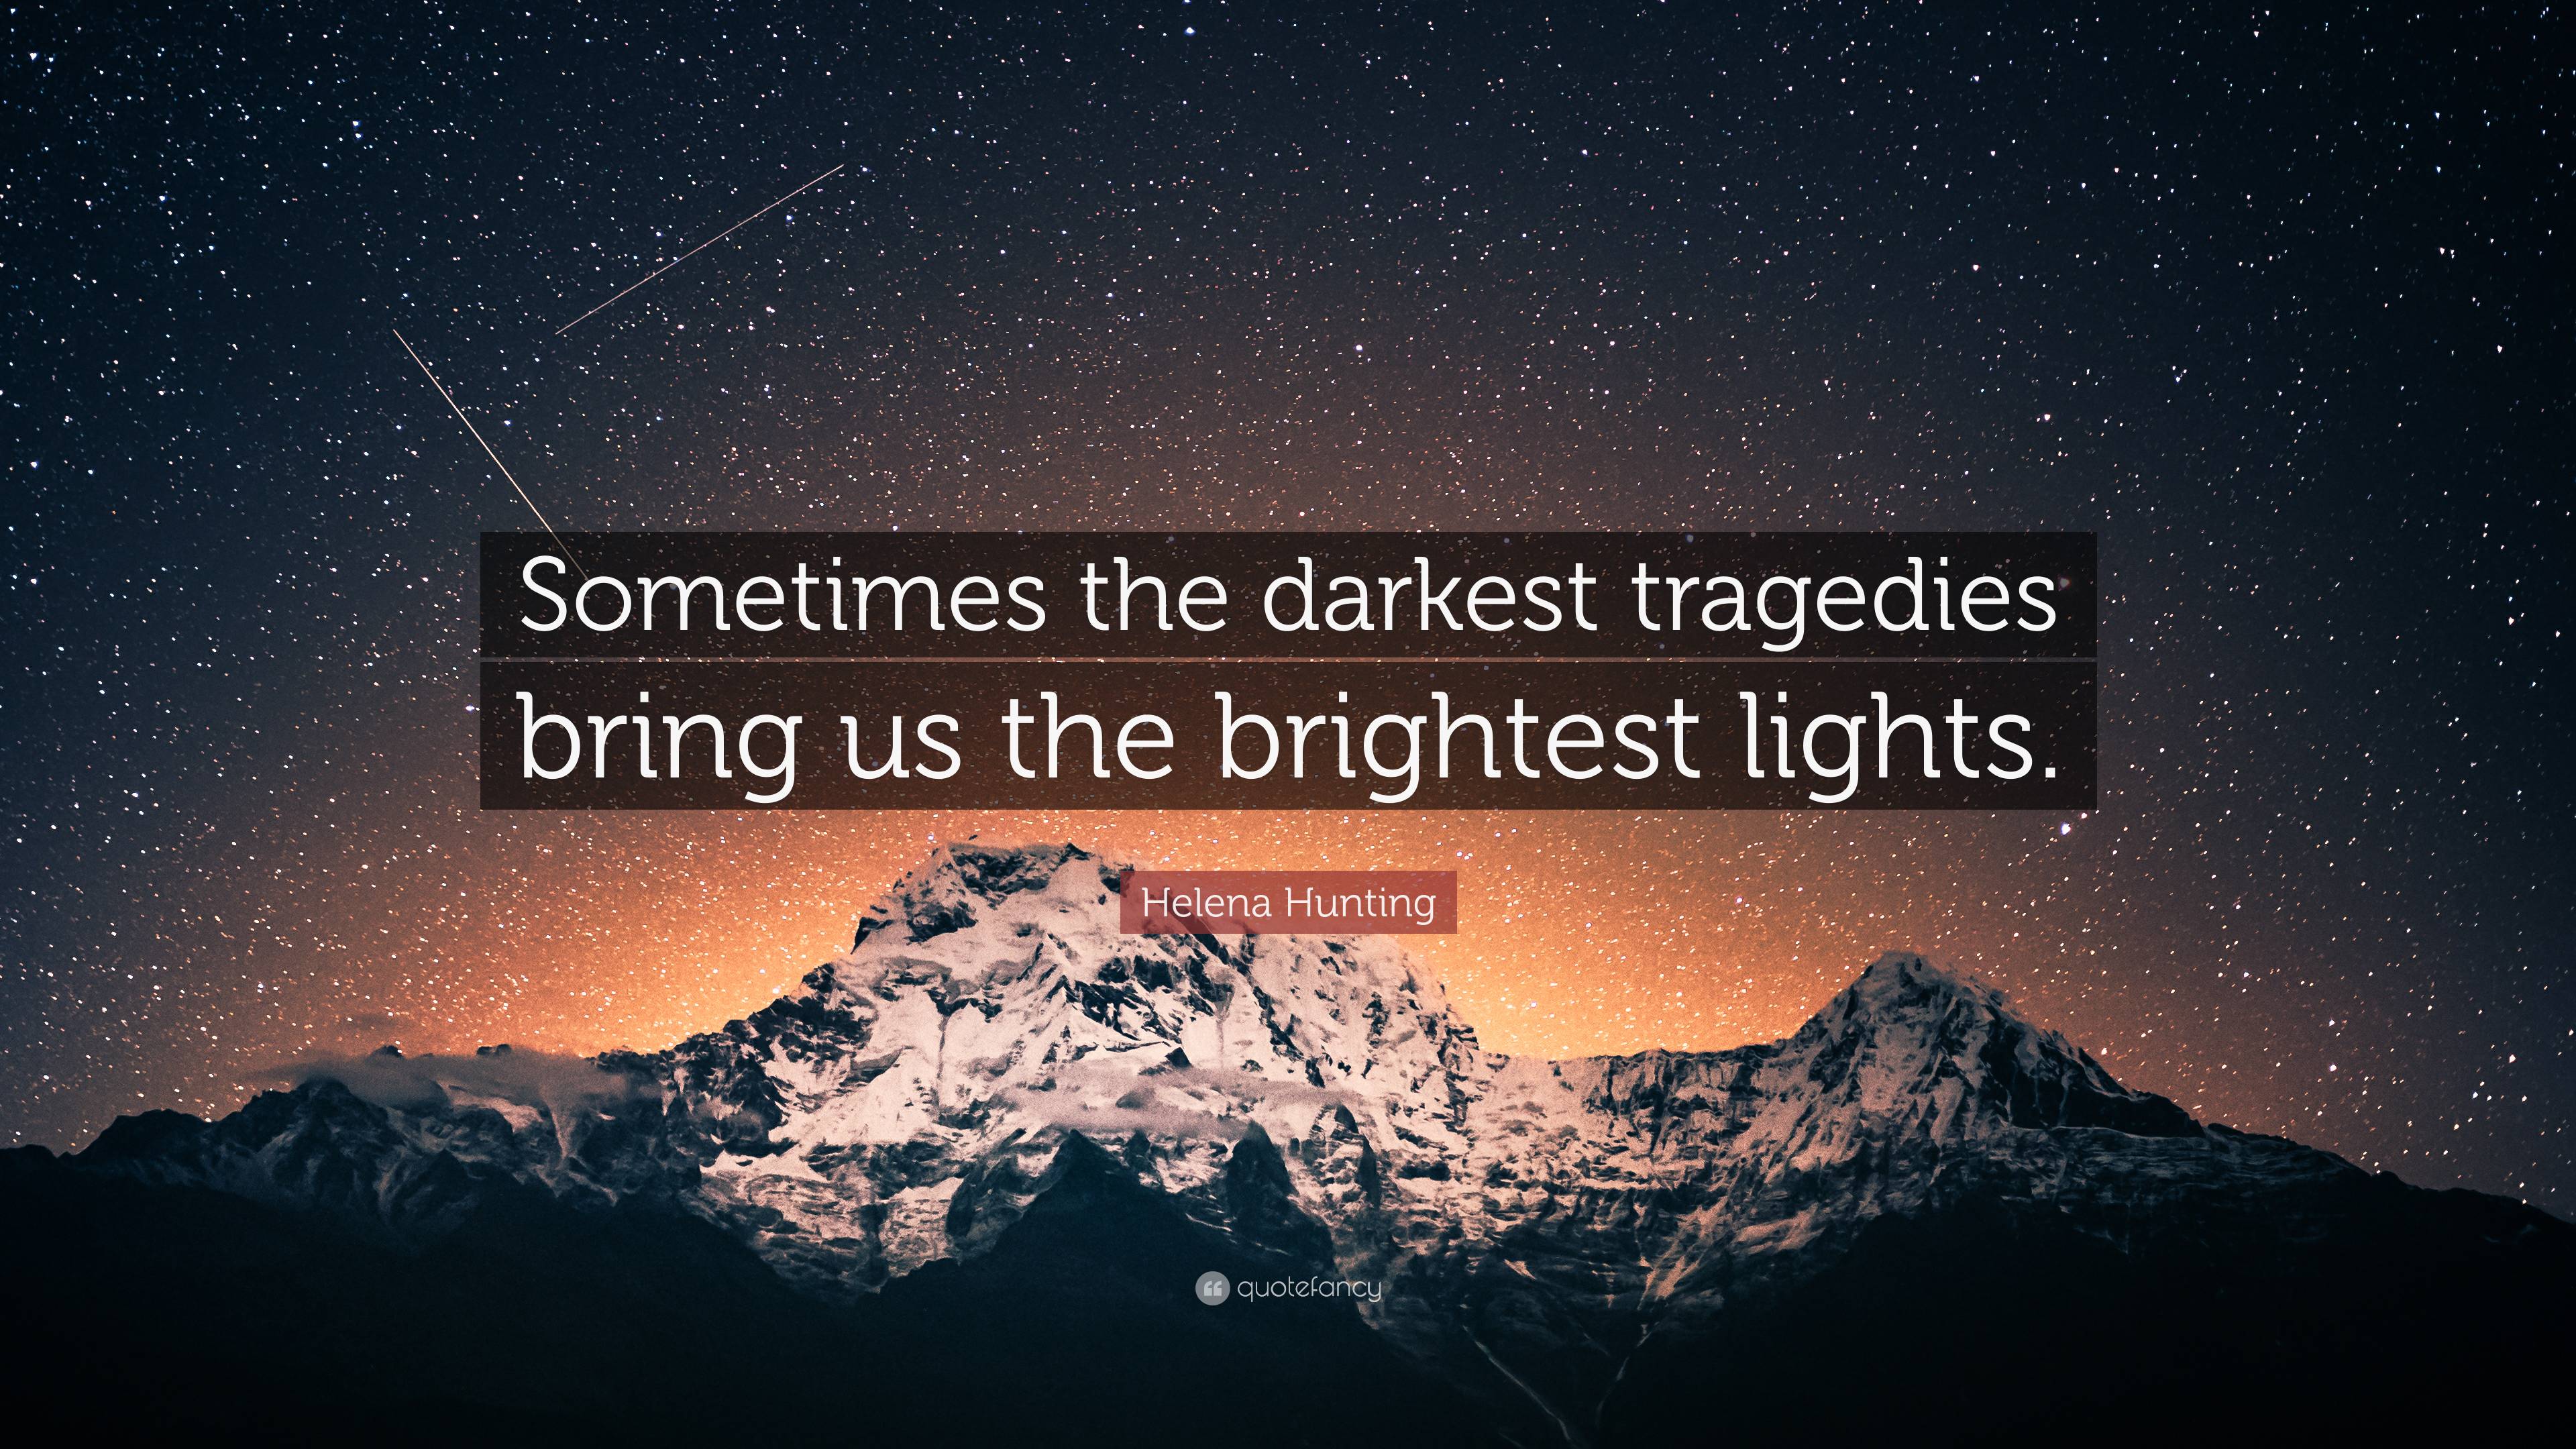 Helena Hunting Quote: “Sometimes the darkest tragedies bring us the ...